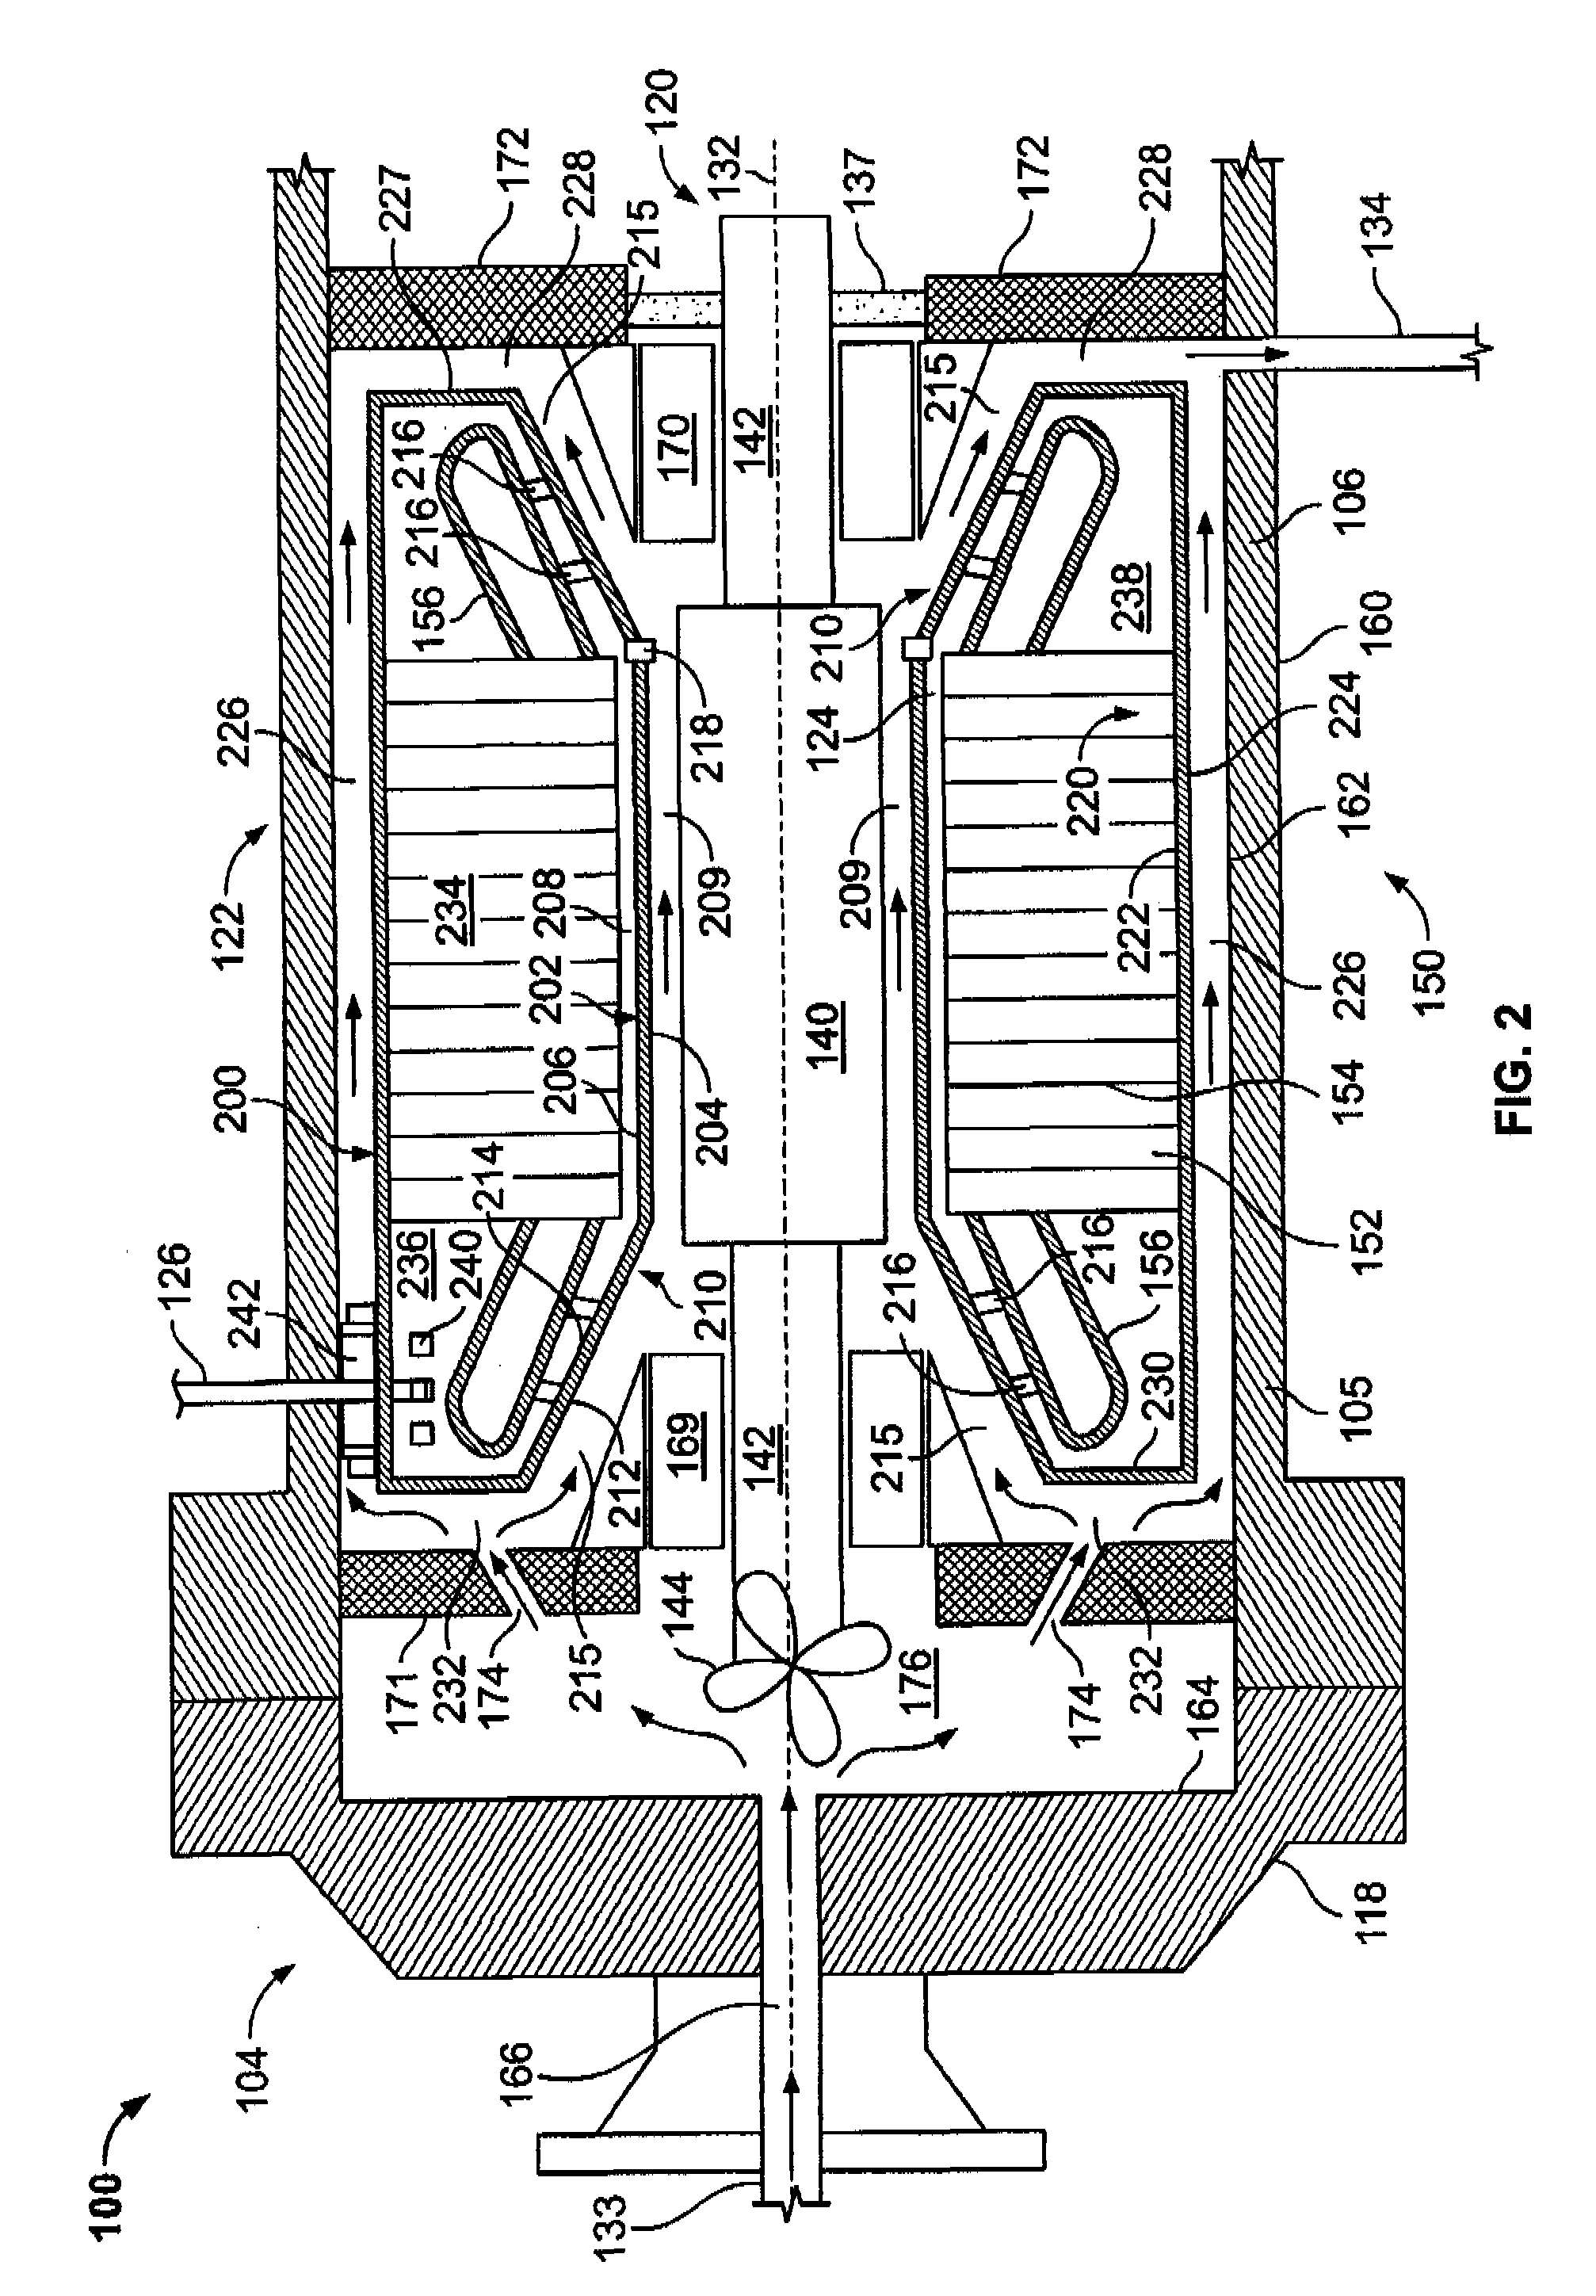 Methods and apparatus for using an electrical machine to transport fluids through a pipeline